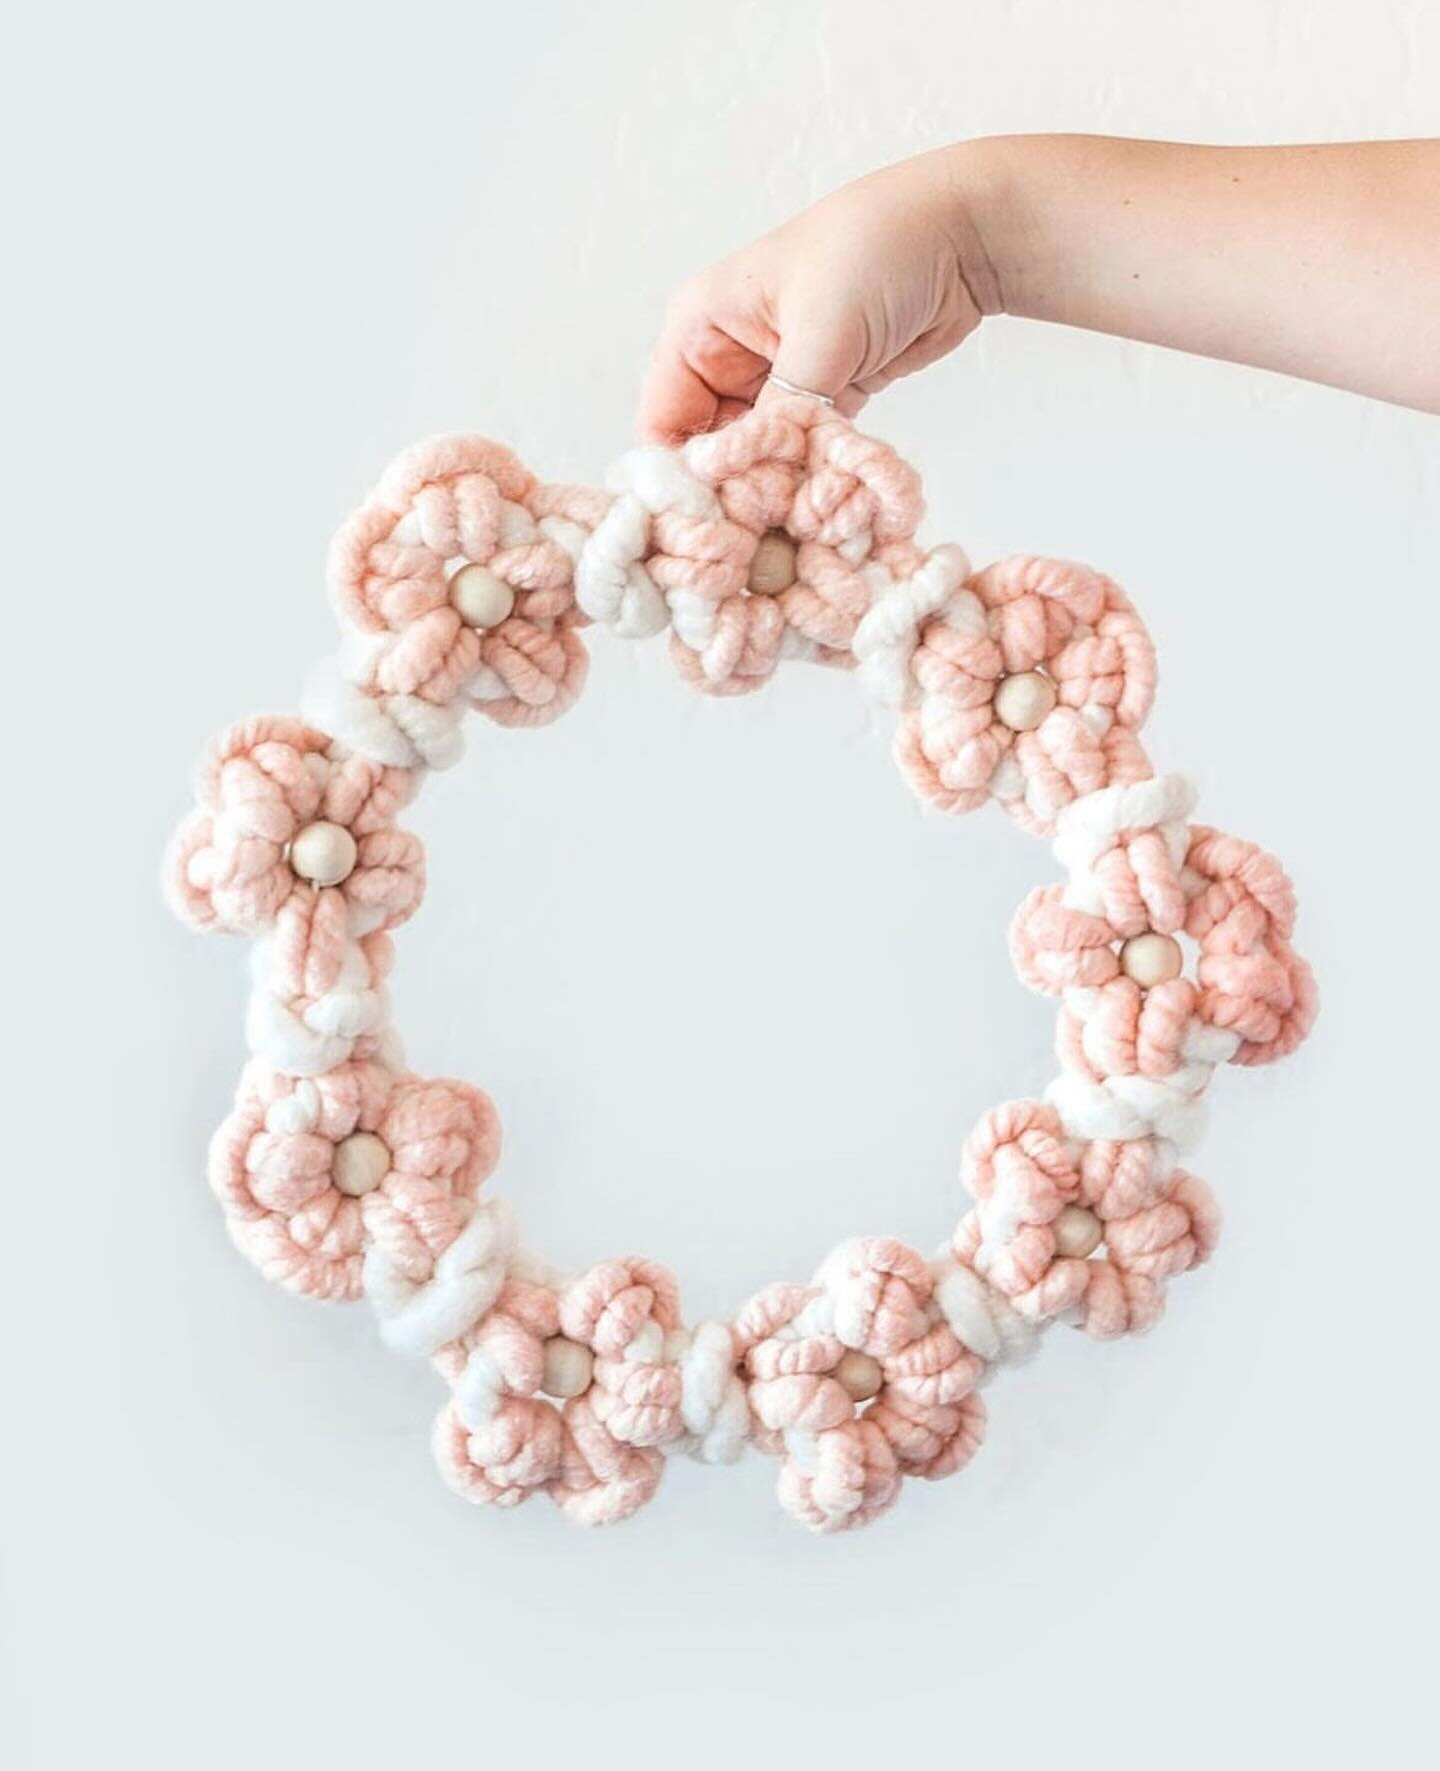 Let&rsquo;s make a macrame floral wreath! 
This full tutorial (with video) is inside my membership. It&rsquo;s the perfect way to add some fiber goodness to your spring decor. You can use a chunky yarn or rope for big impact!
XO
Lindsey 

*comment ME